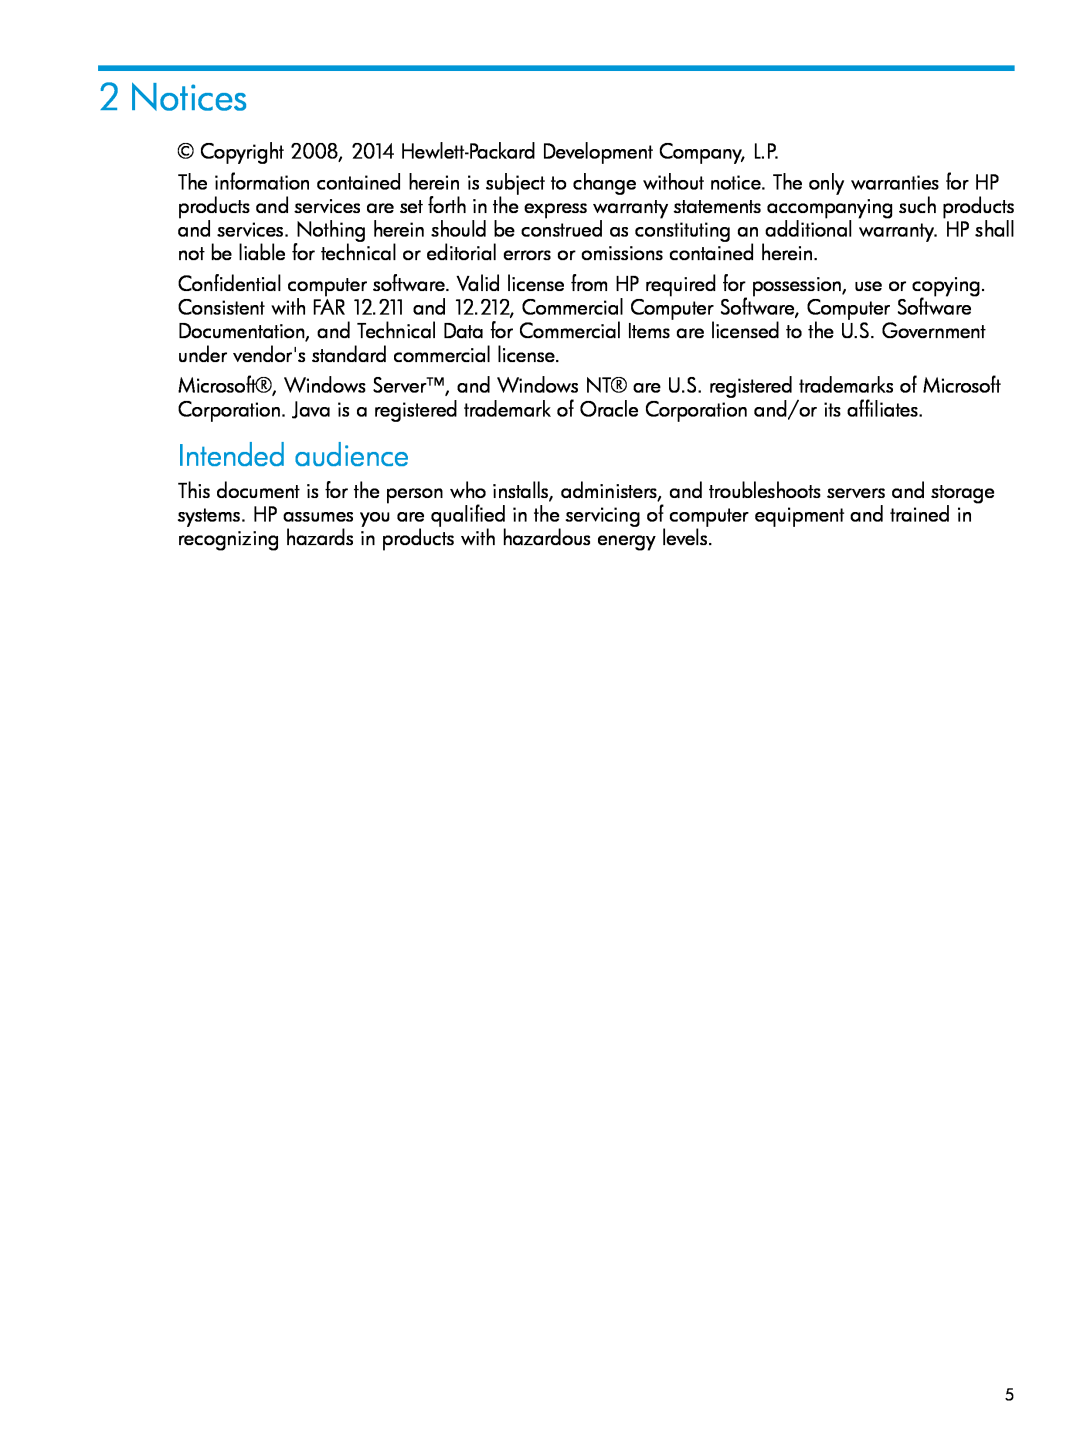 HP Microsoft Windows Server 2012 manual Notices, Intended audience 